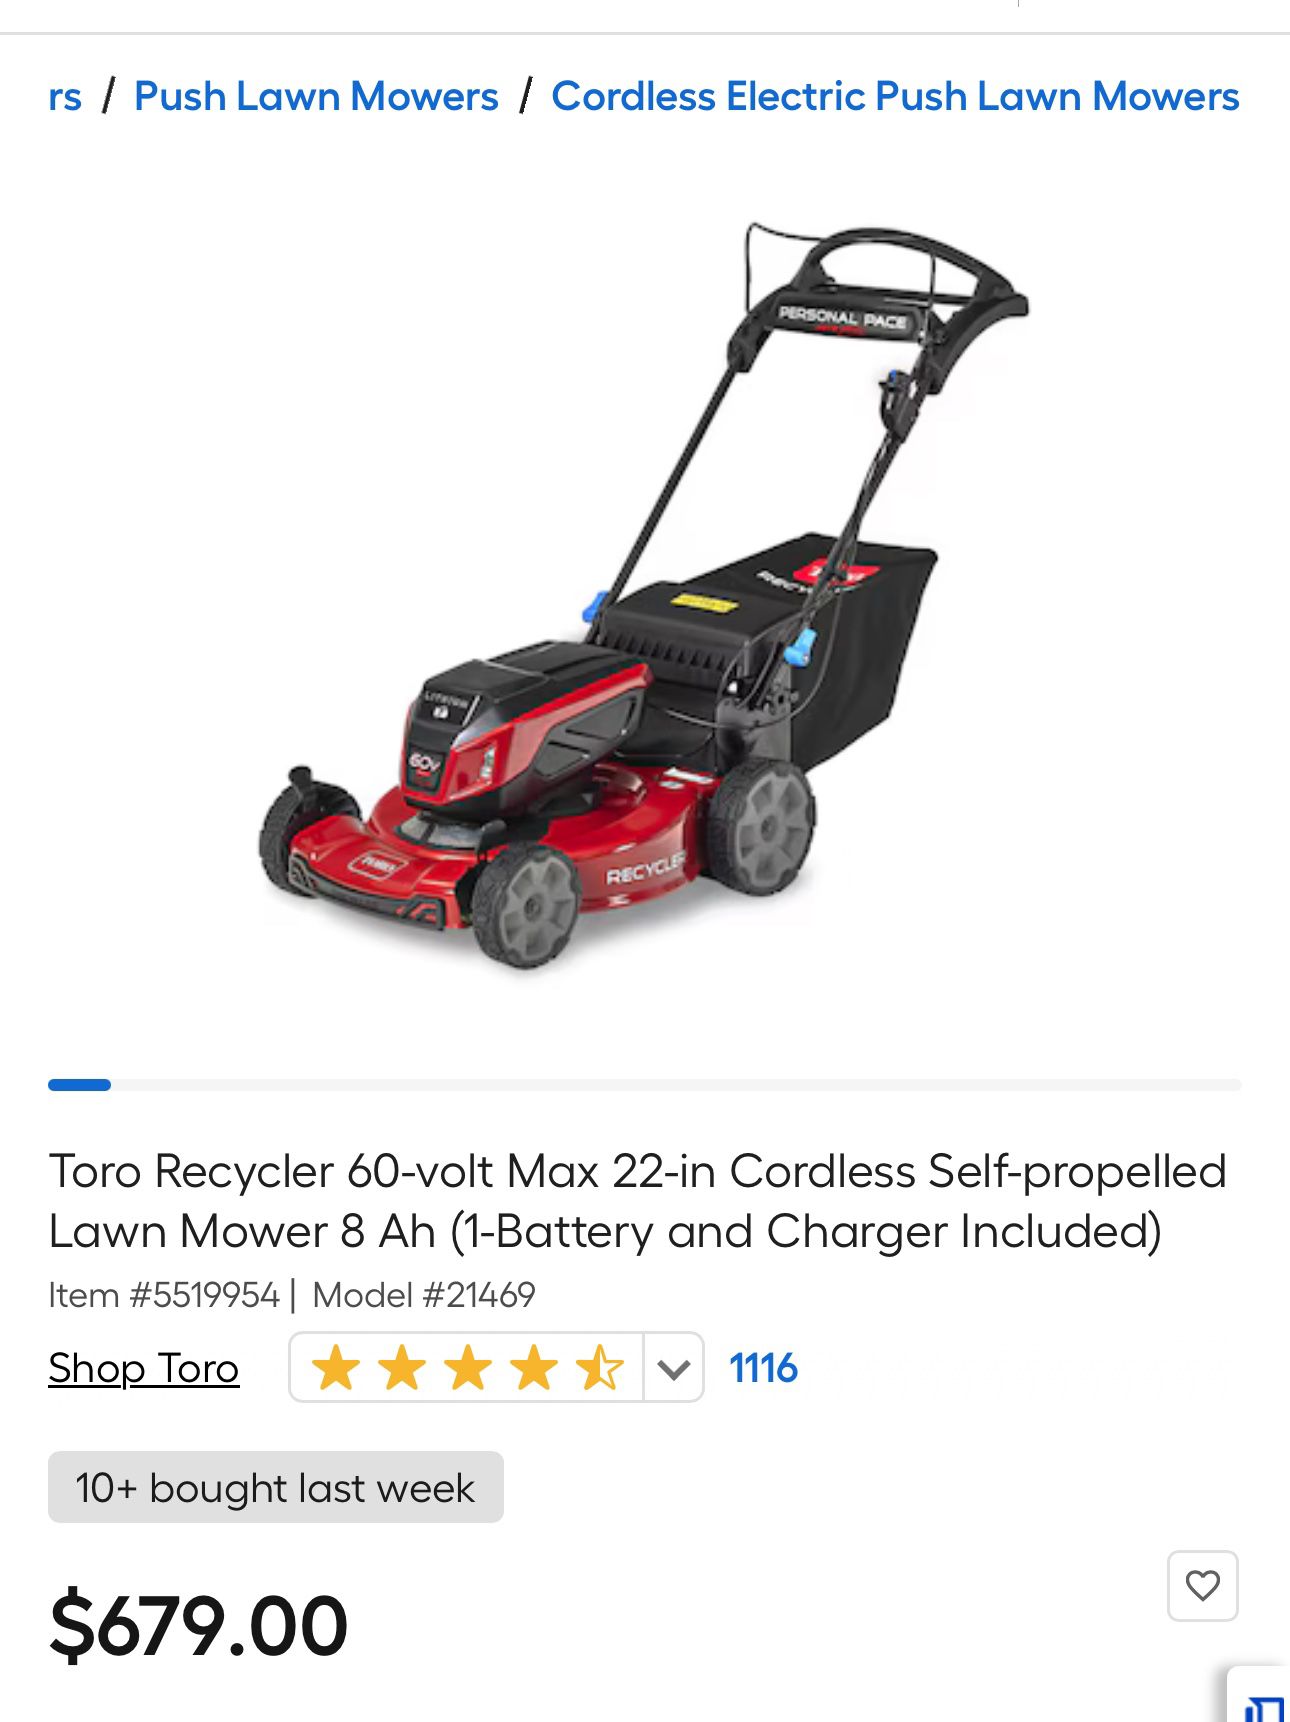 Toro Recycler 60-volt Max 22-in Cordless Self-propelled Lawn Mower 8 Ah (1-Battery and Charger Included)